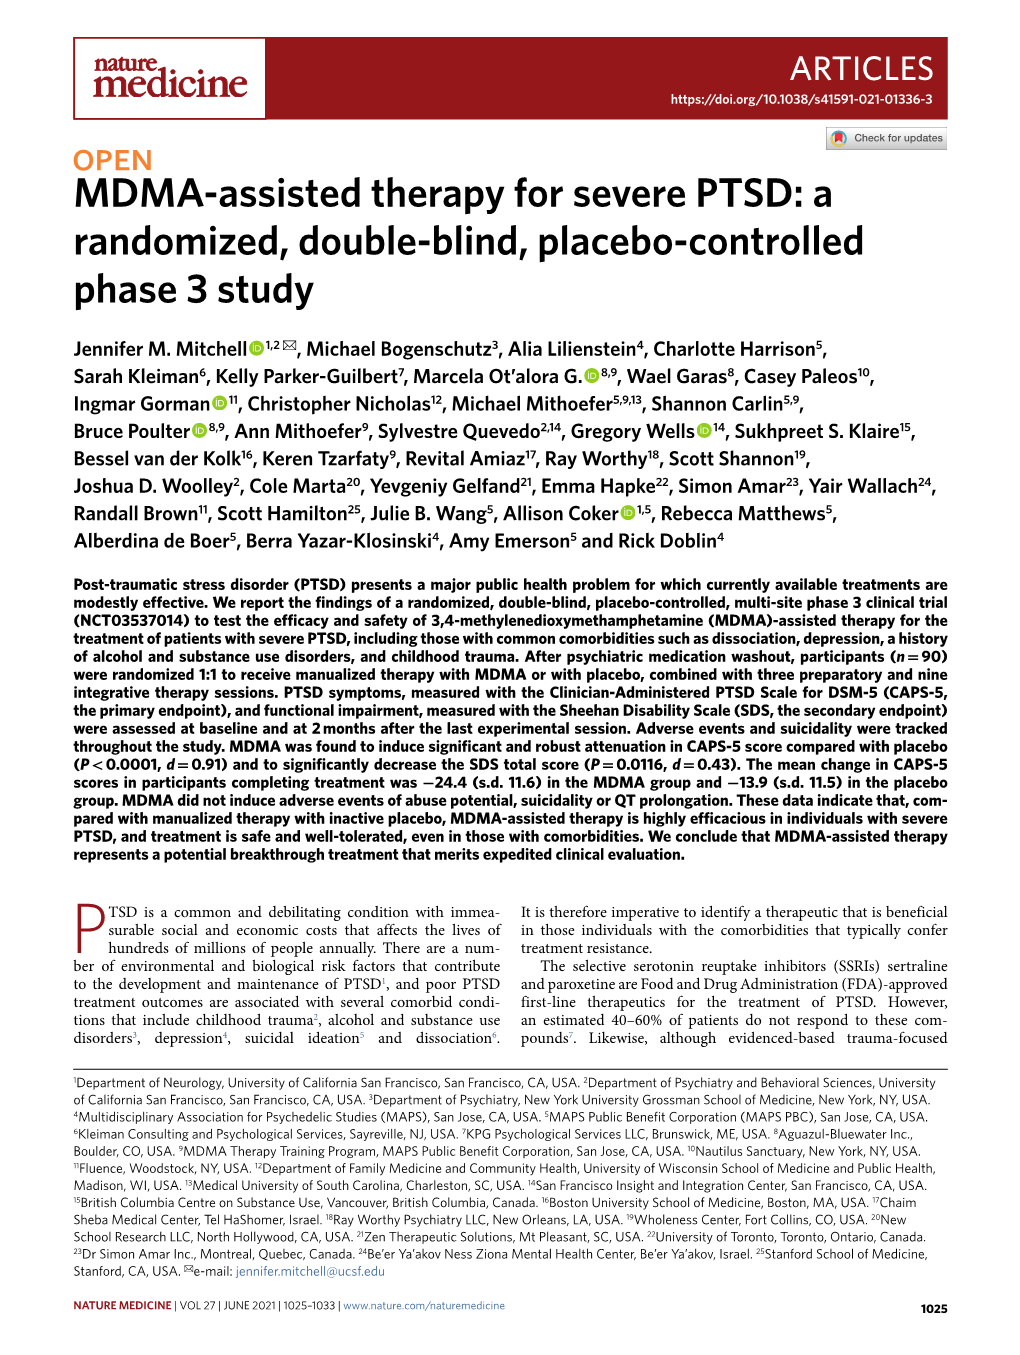 MDMA-Assisted Therapy for Severe PTSD: a Randomized, Double-Blind, Placebo-Controlled Phase 3 Study